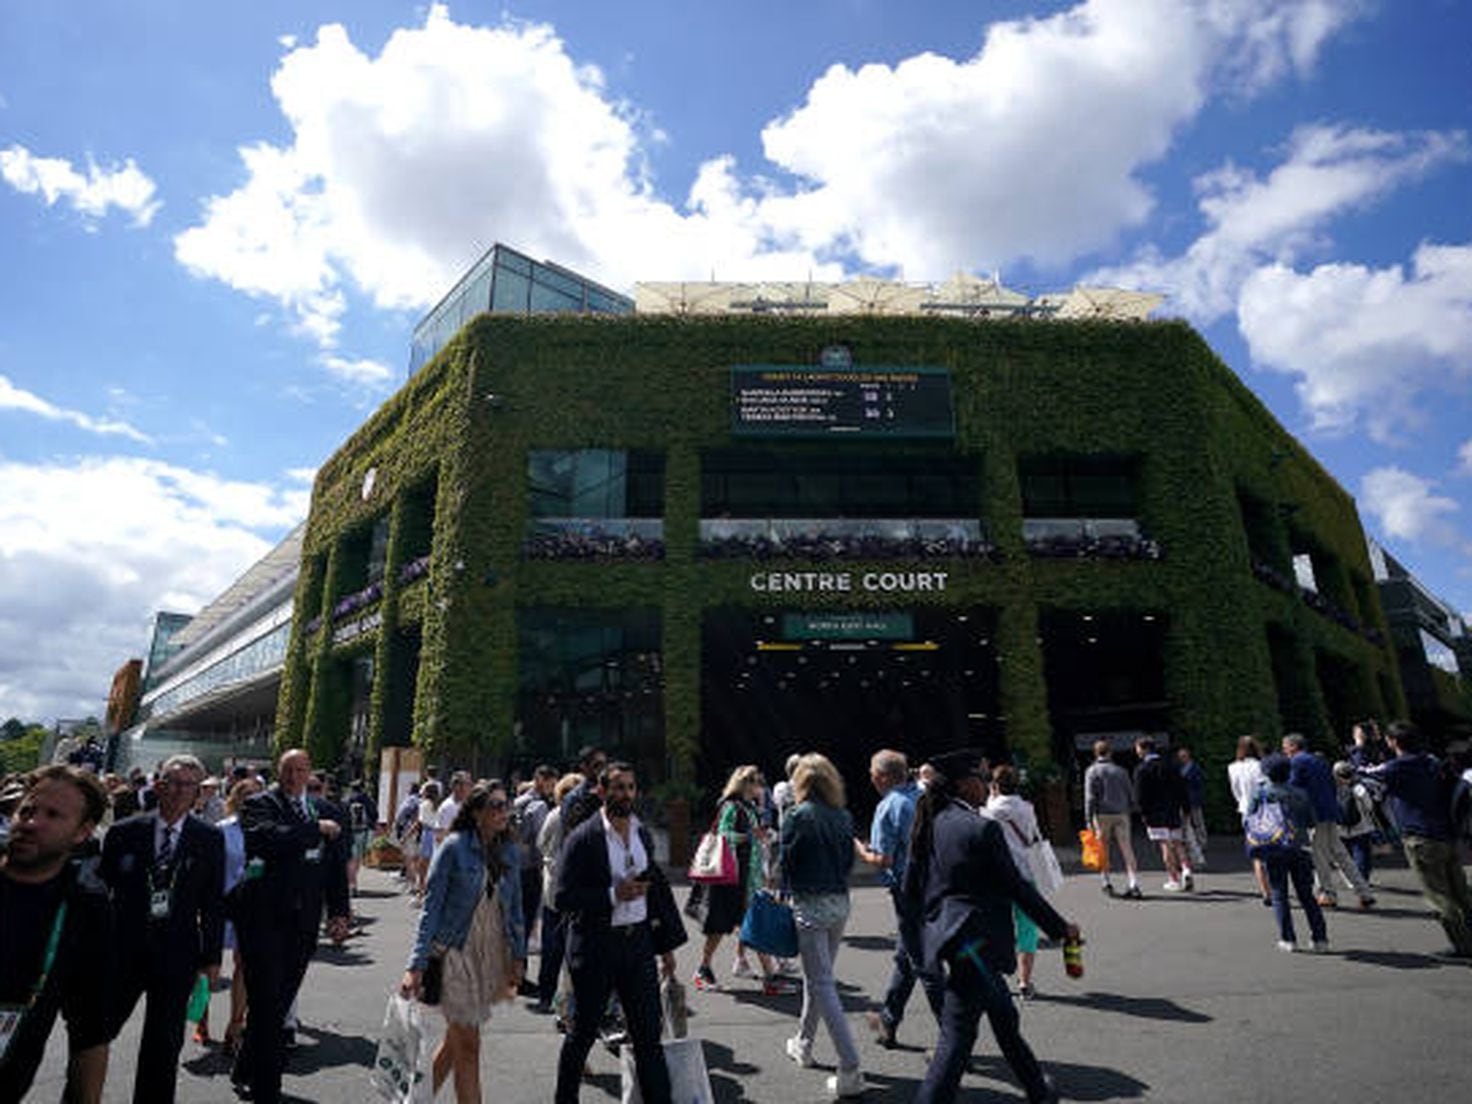 Wimbledon 2021: A Guide to the Last 'Manic Monday